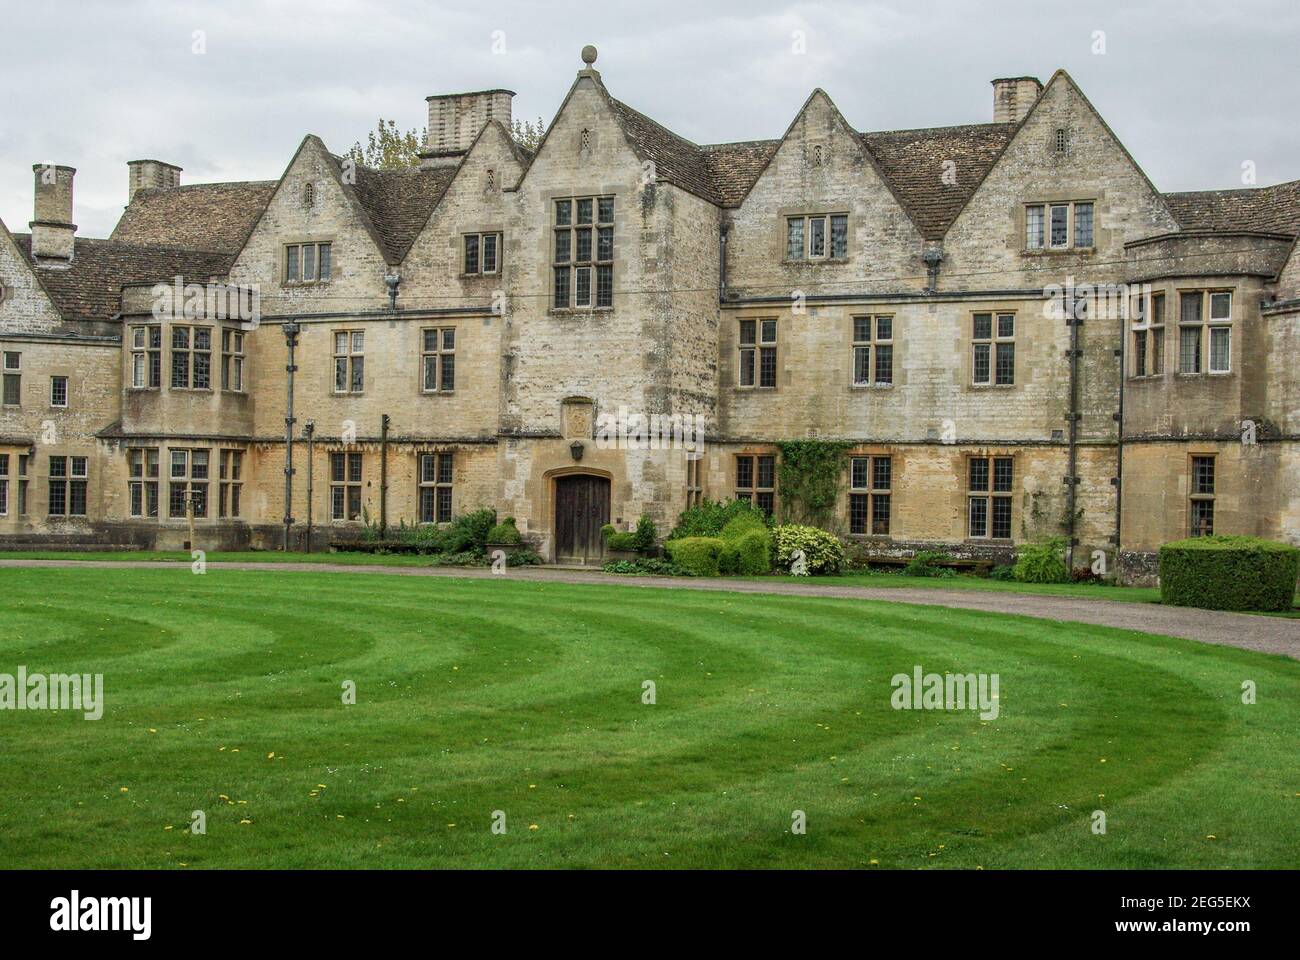 The frontage of Rodmarton Manor, an Arts and Crafts style house, near Cirencester, Gloucestershire, UK Stock Photo